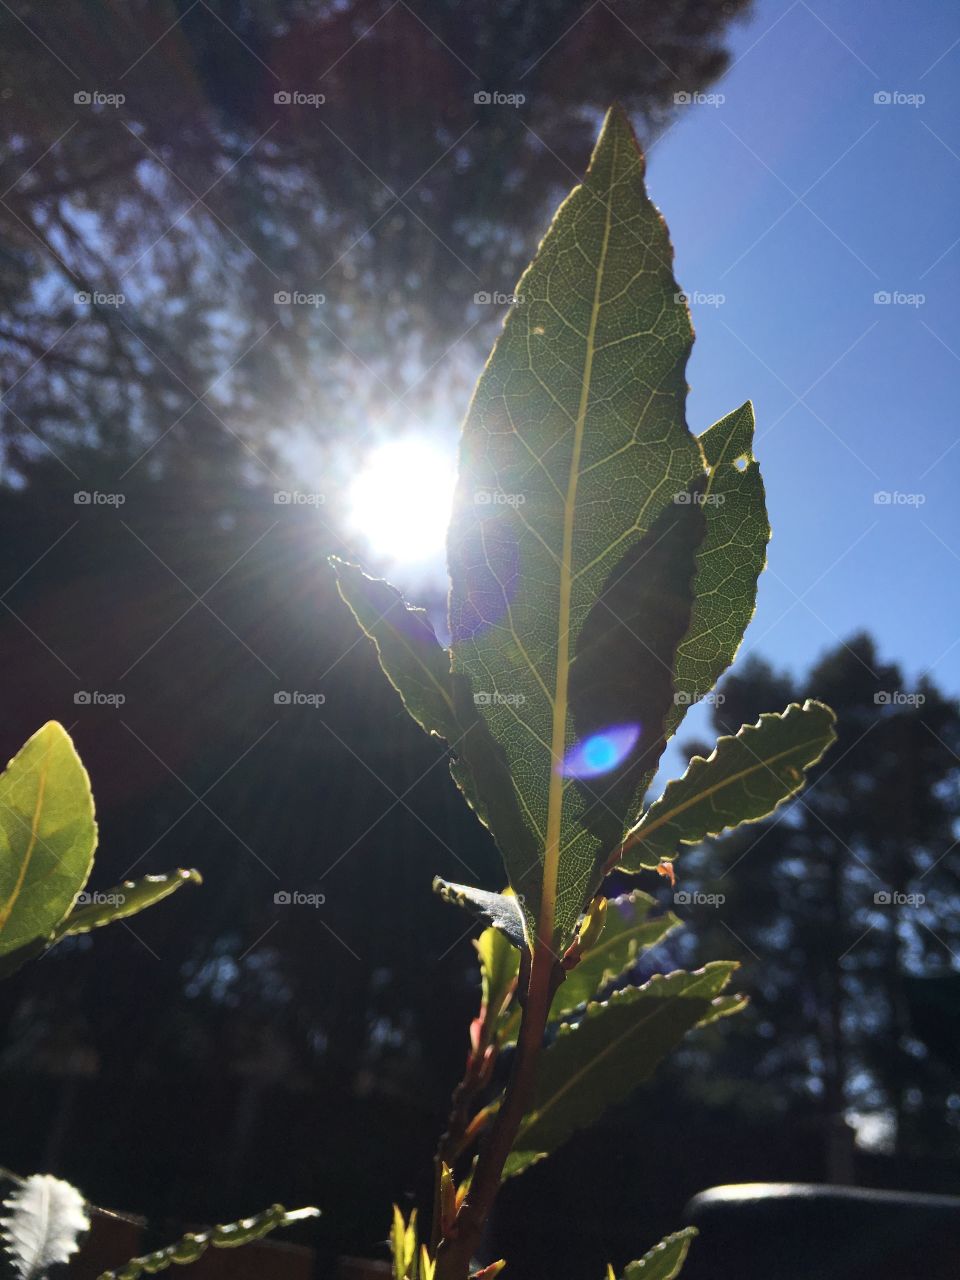 Bay leaves with sun rays shining through behind and pine trees in the background in my garden